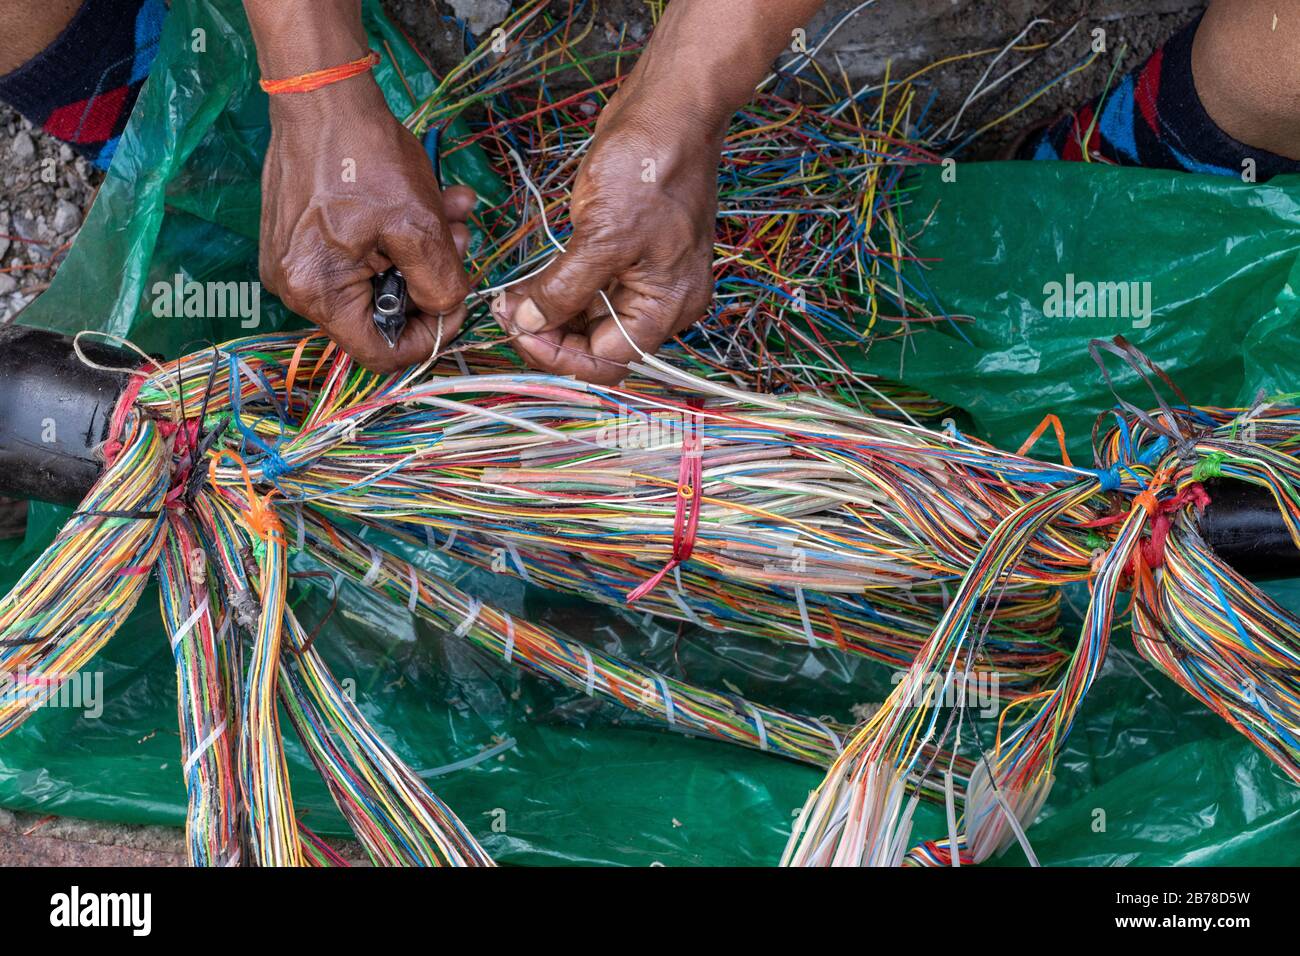 Technician repairing an underground telephone line multicolored wires Stock Photo